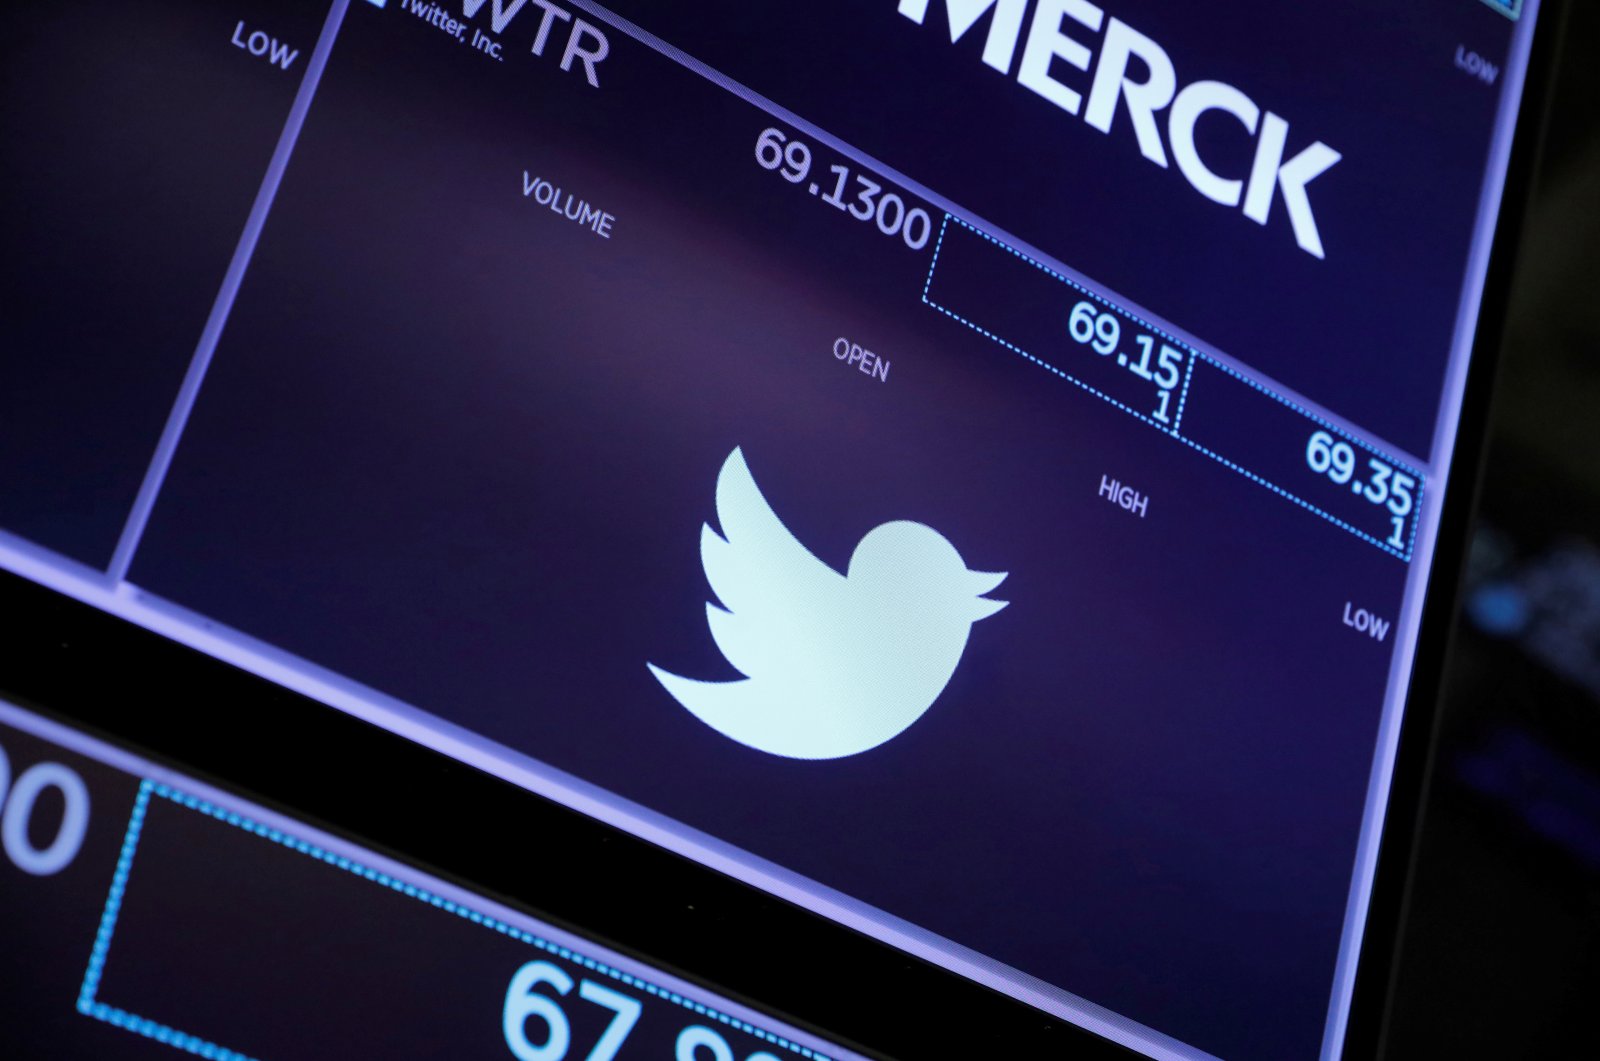 The logo for Twitter is seen on the trading floor at the New York Stock Exchange (NYSE) in Manhattan, New York City, U.S., Aug. 3, 2021. (Reuters Photo)